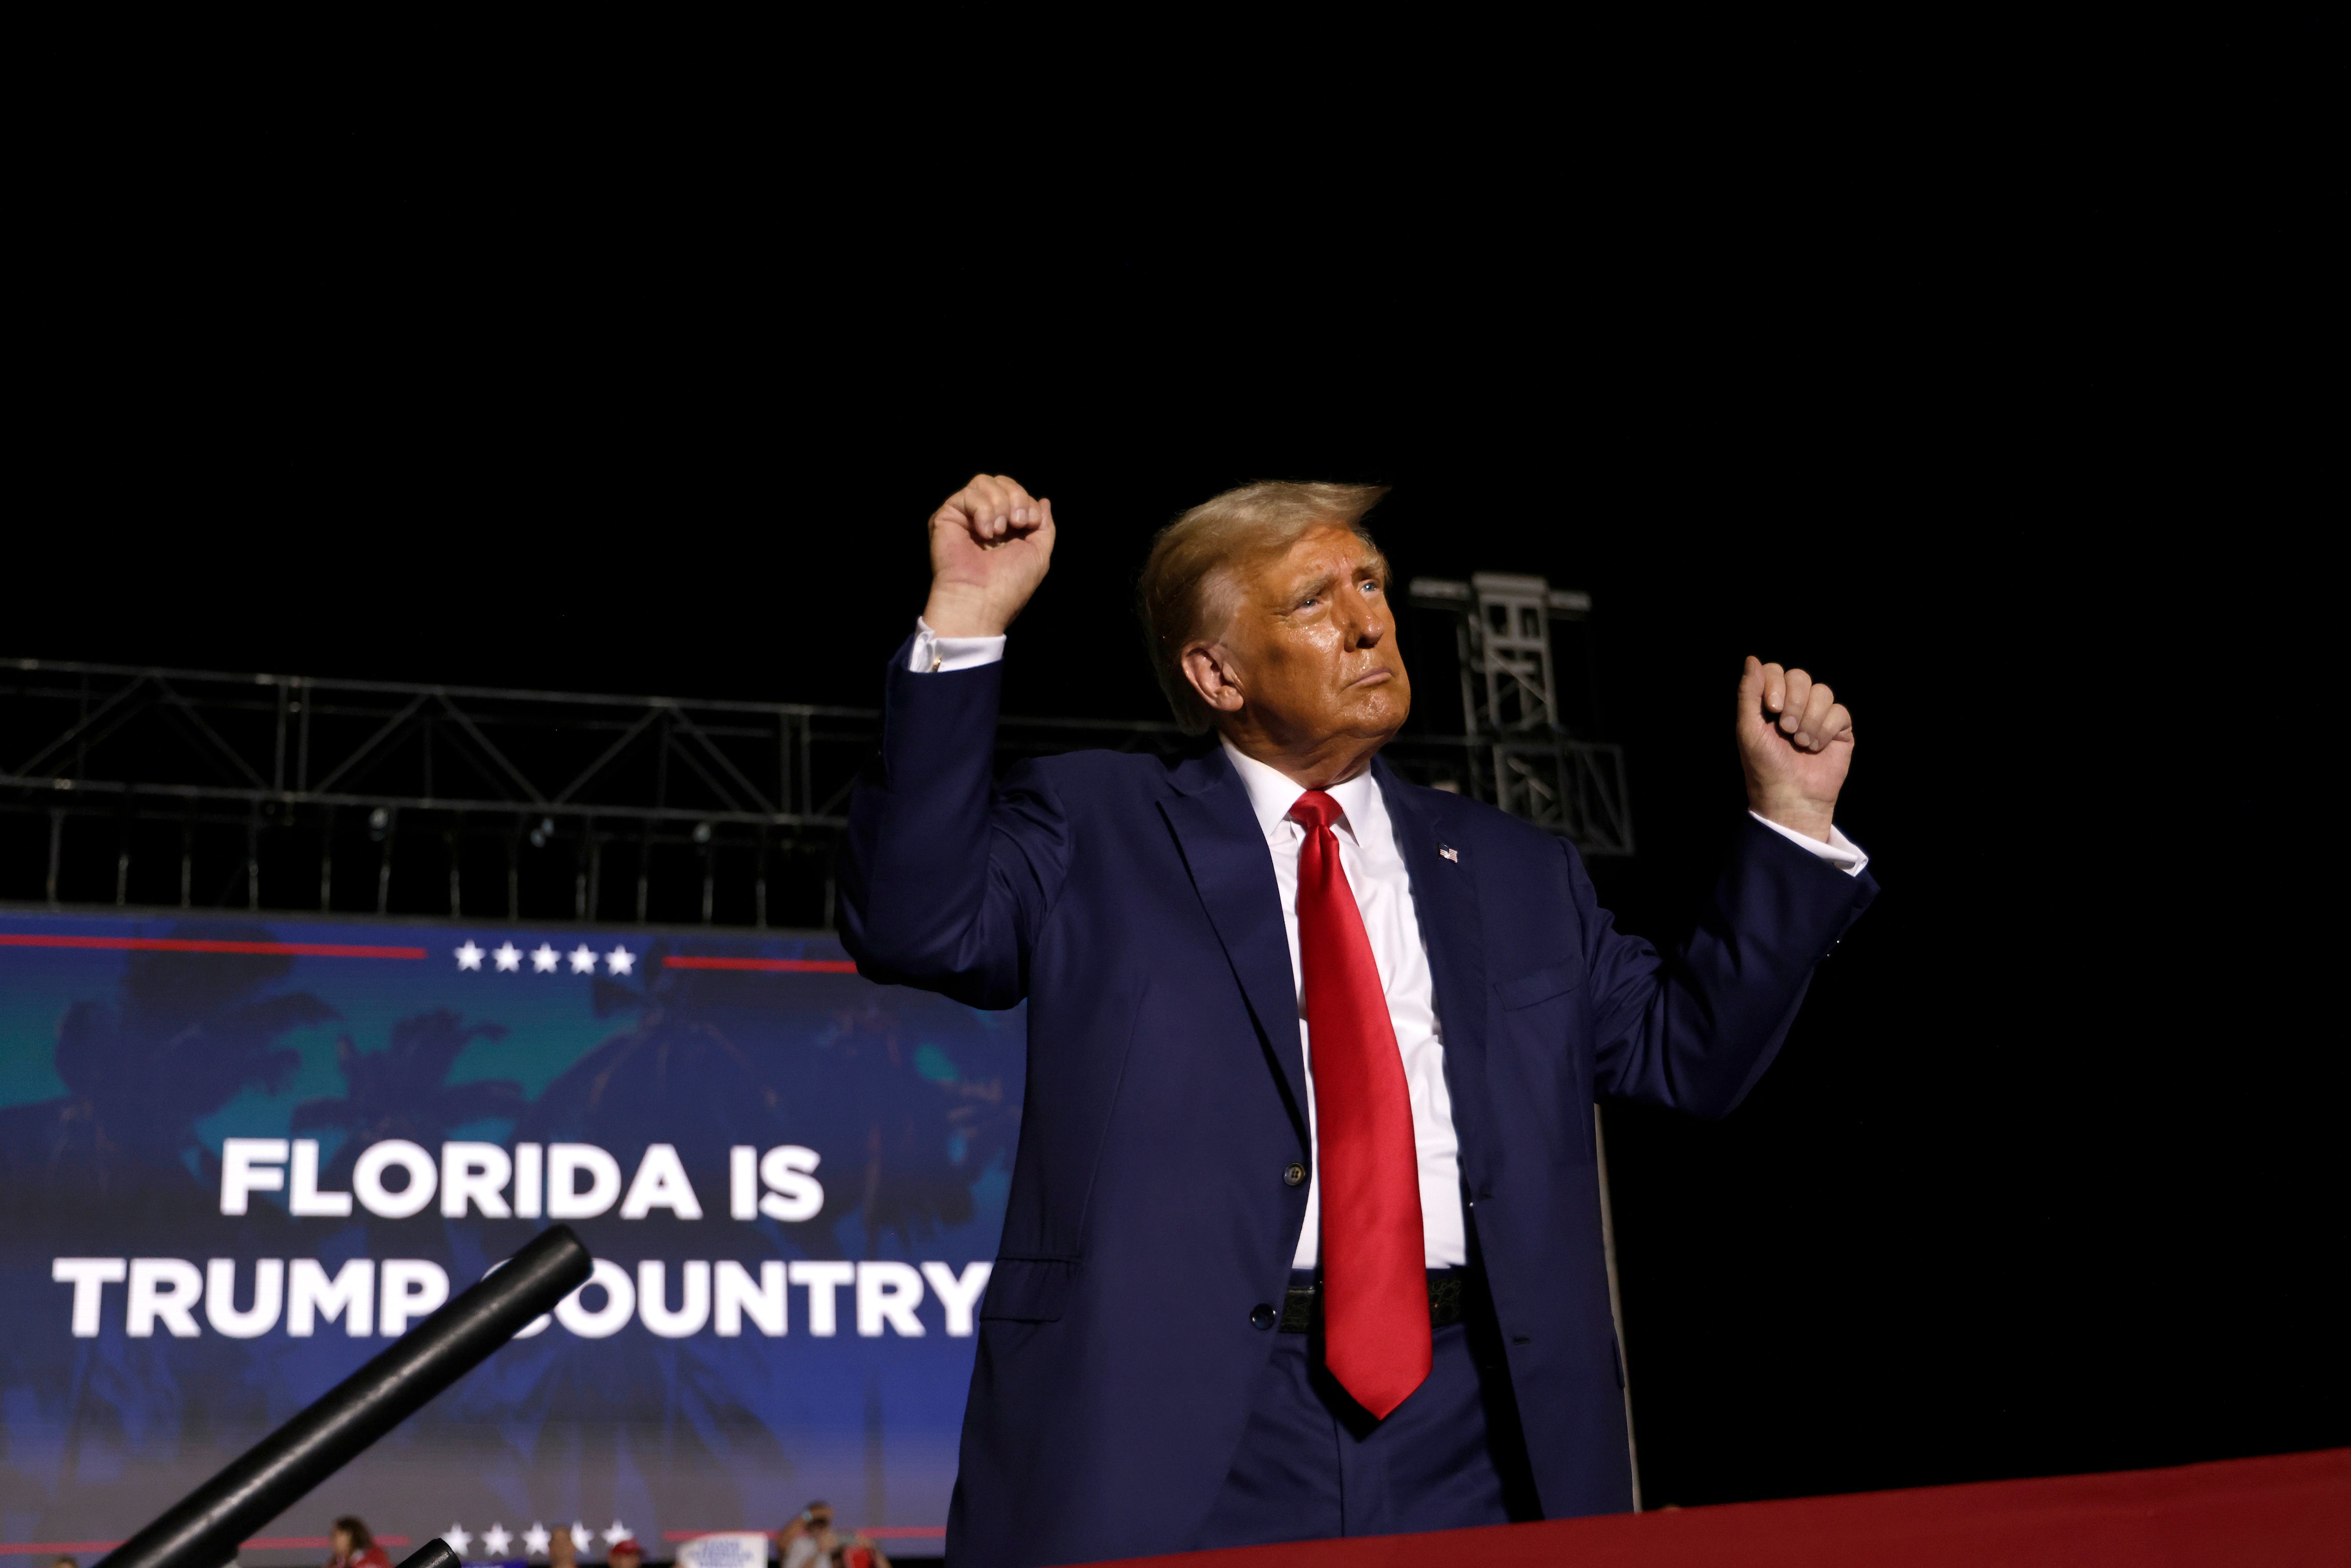 Donald Trump holds a campaign rally in Florida on 8 November